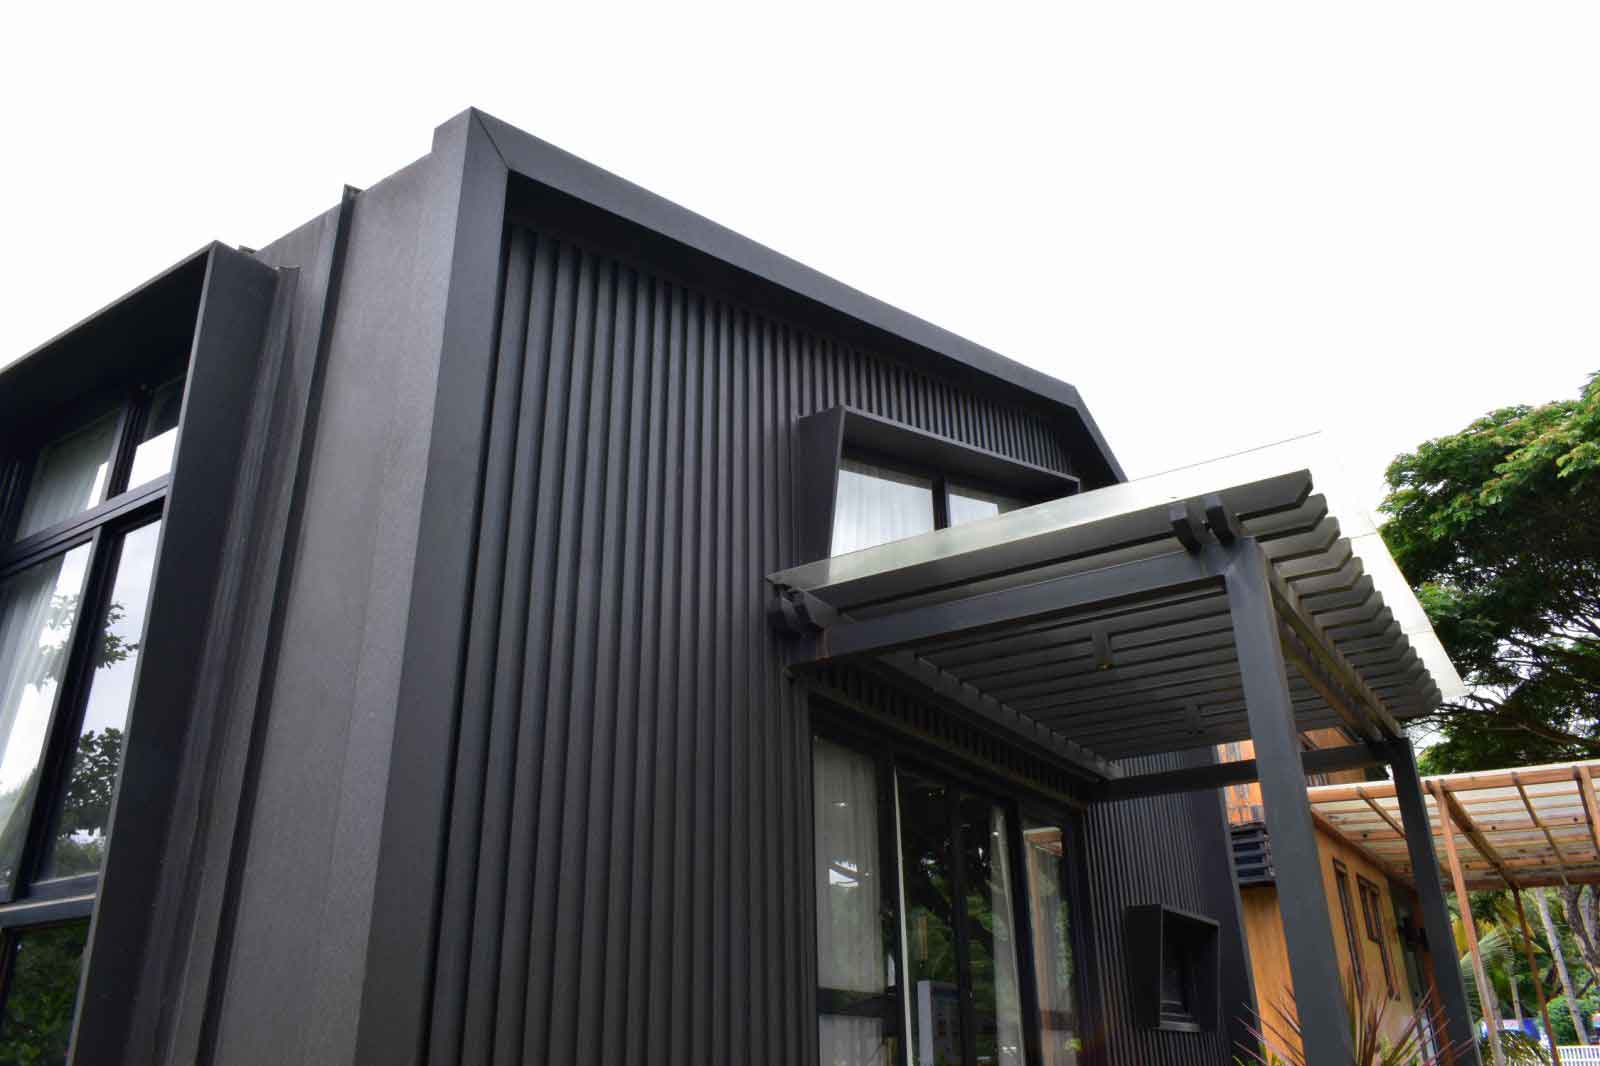 How to Maintain a Cool Exterior With Dark Colored Metal Roofs and Wall Cladding